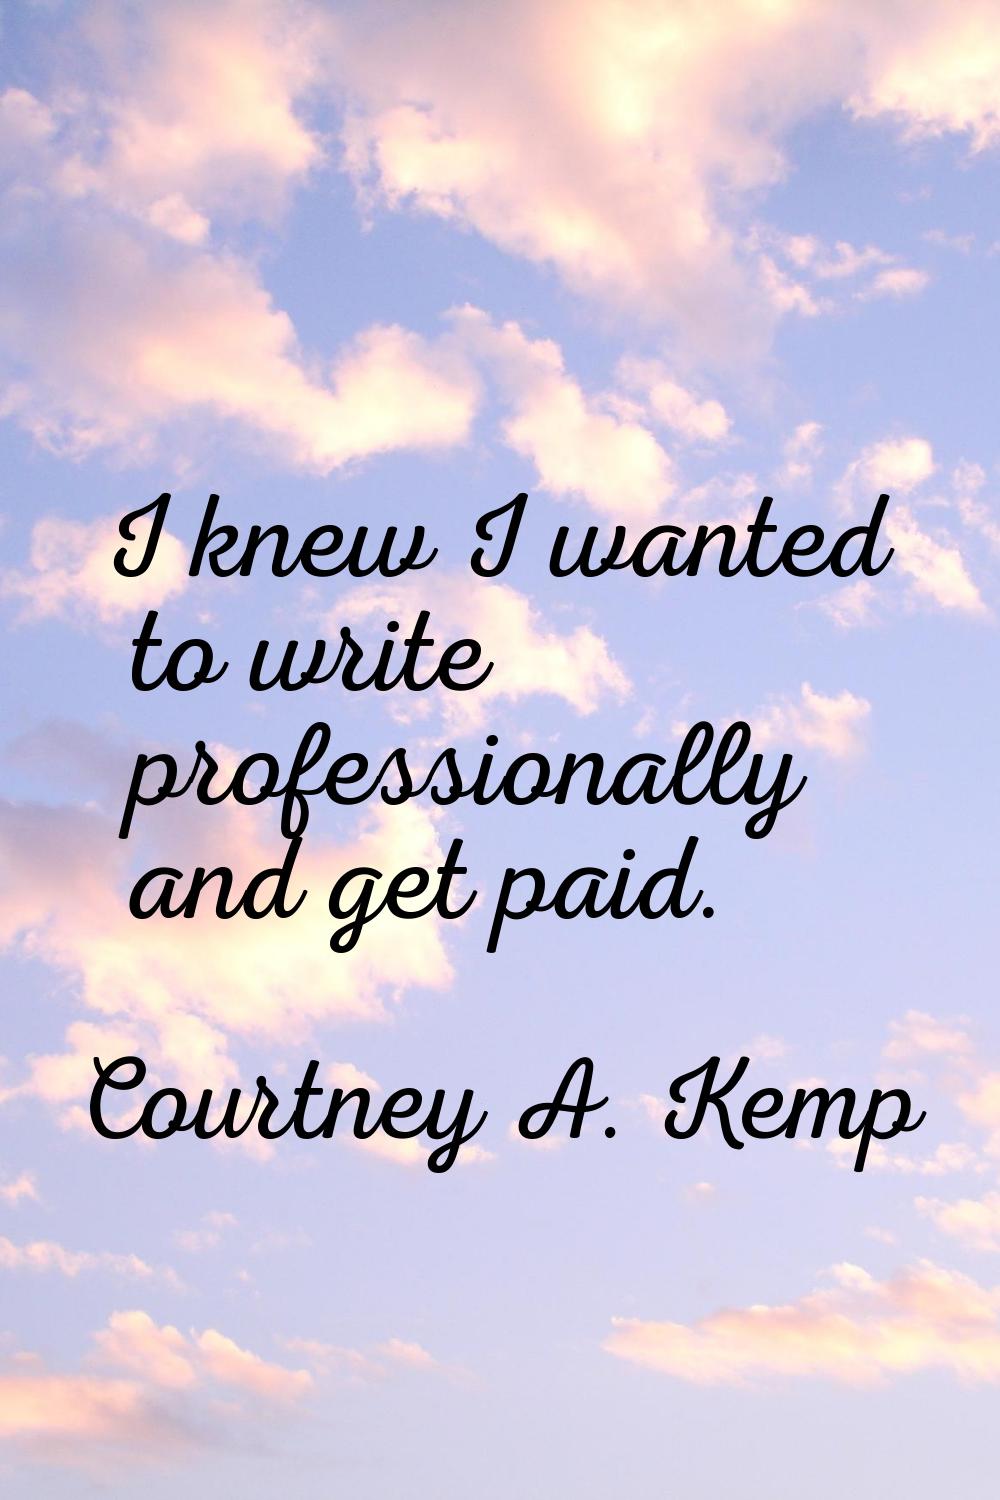 I knew I wanted to write professionally and get paid.